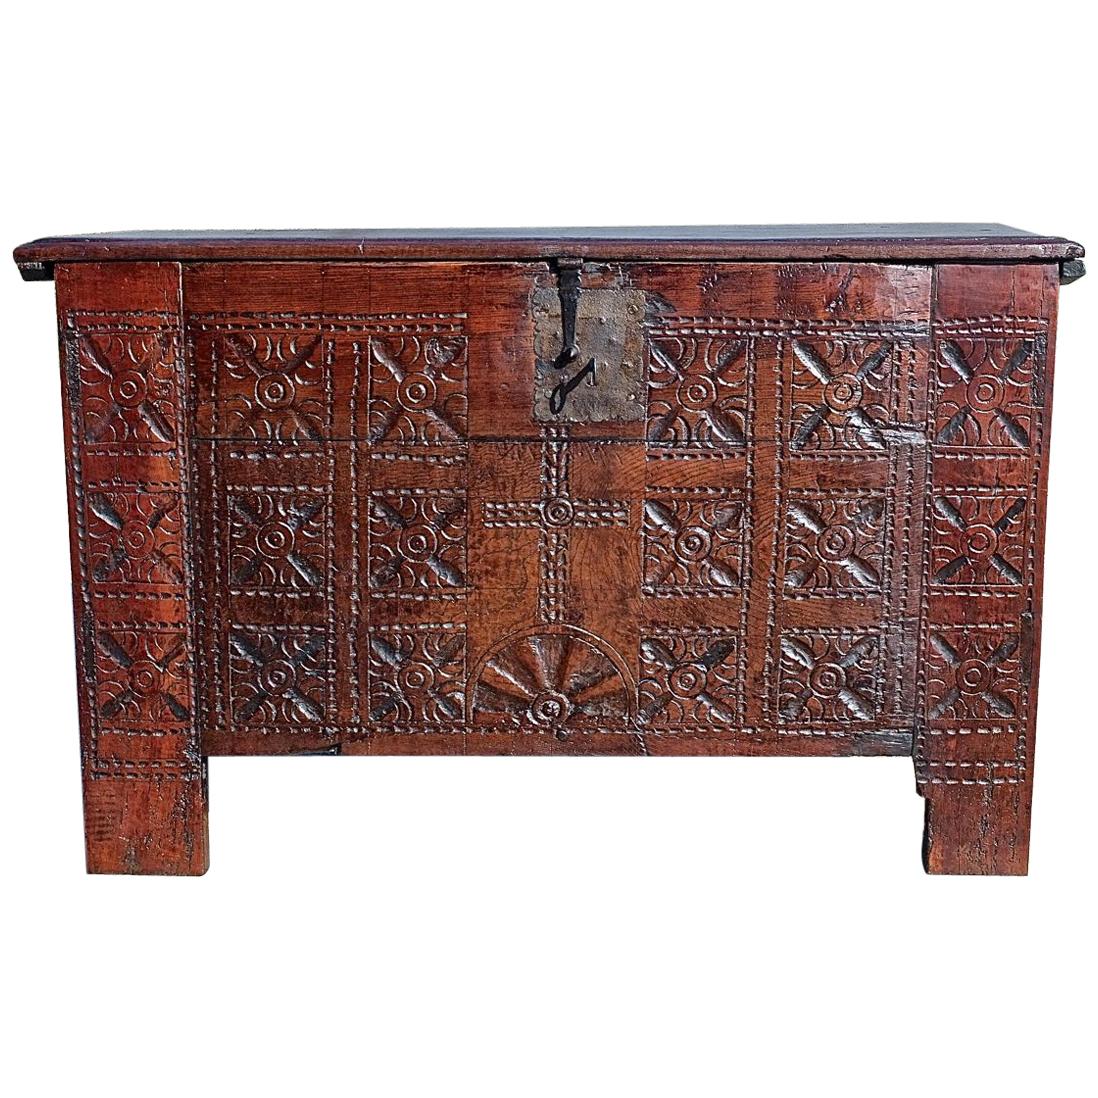 18th Century Cherry and Chestnut Basque Arms Chest "Kutxa" For Sale